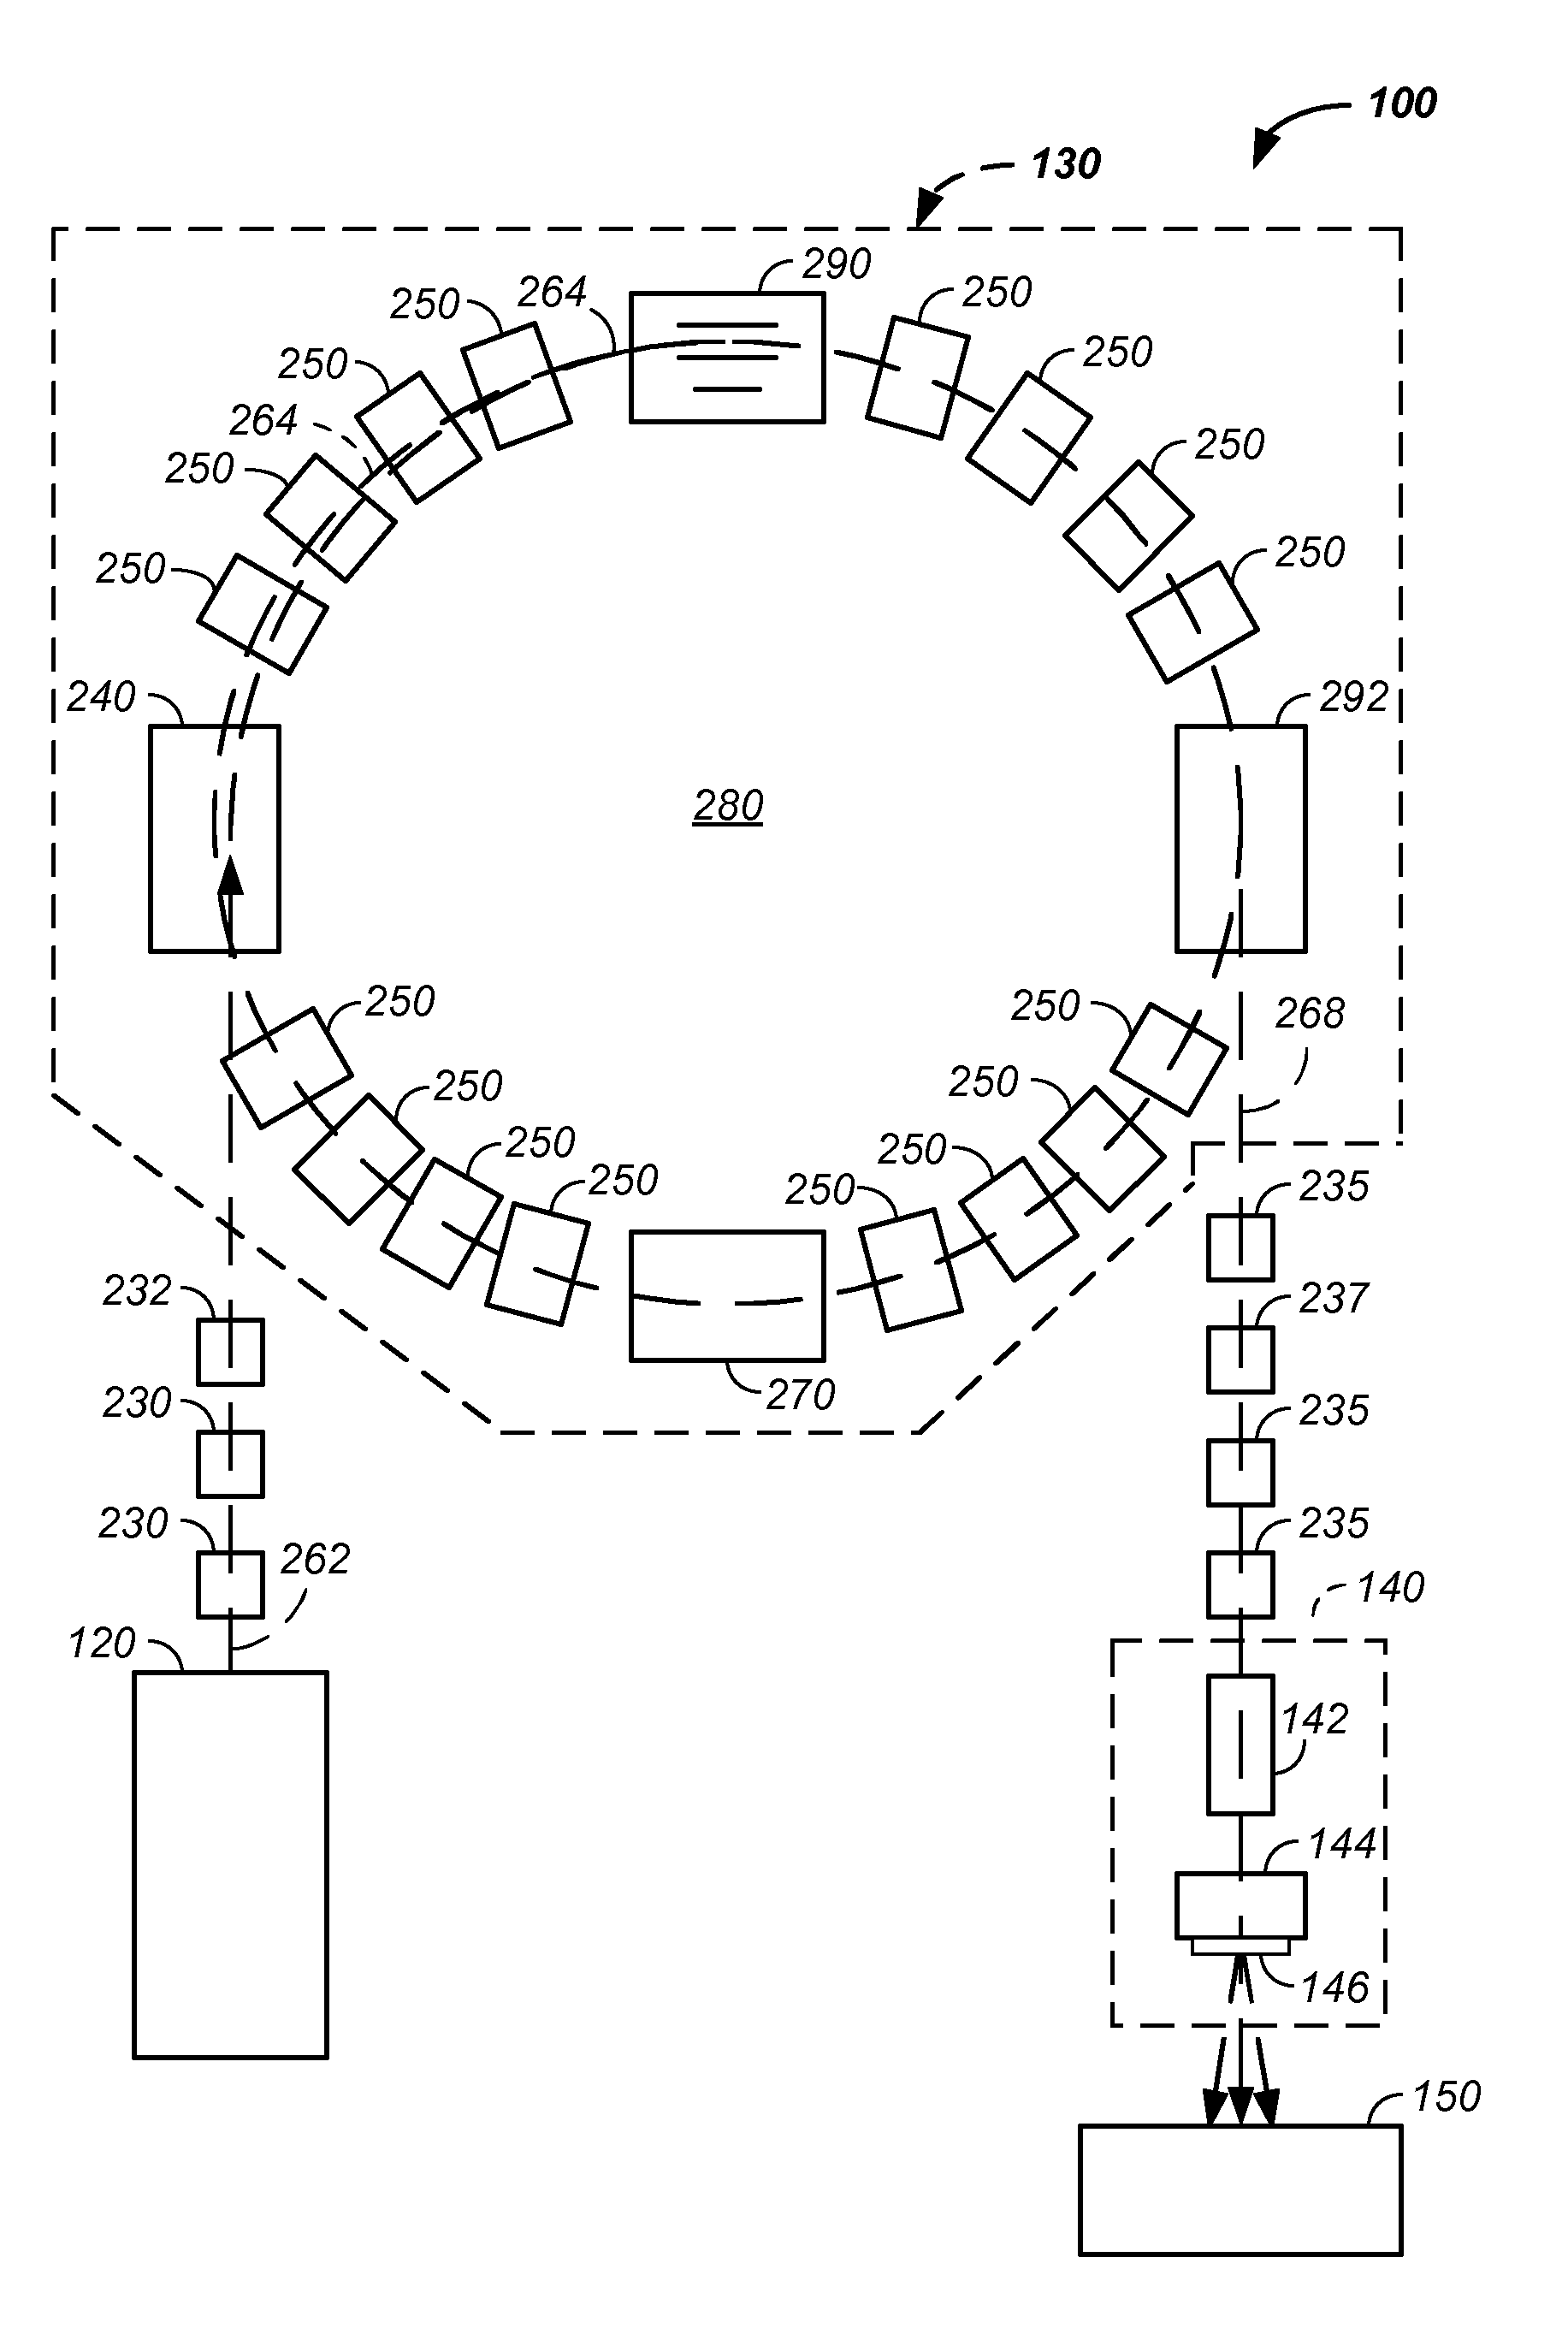 Negative ion beam source vacuum method and apparatus used in conjunction with a charged particle cancer therapy system